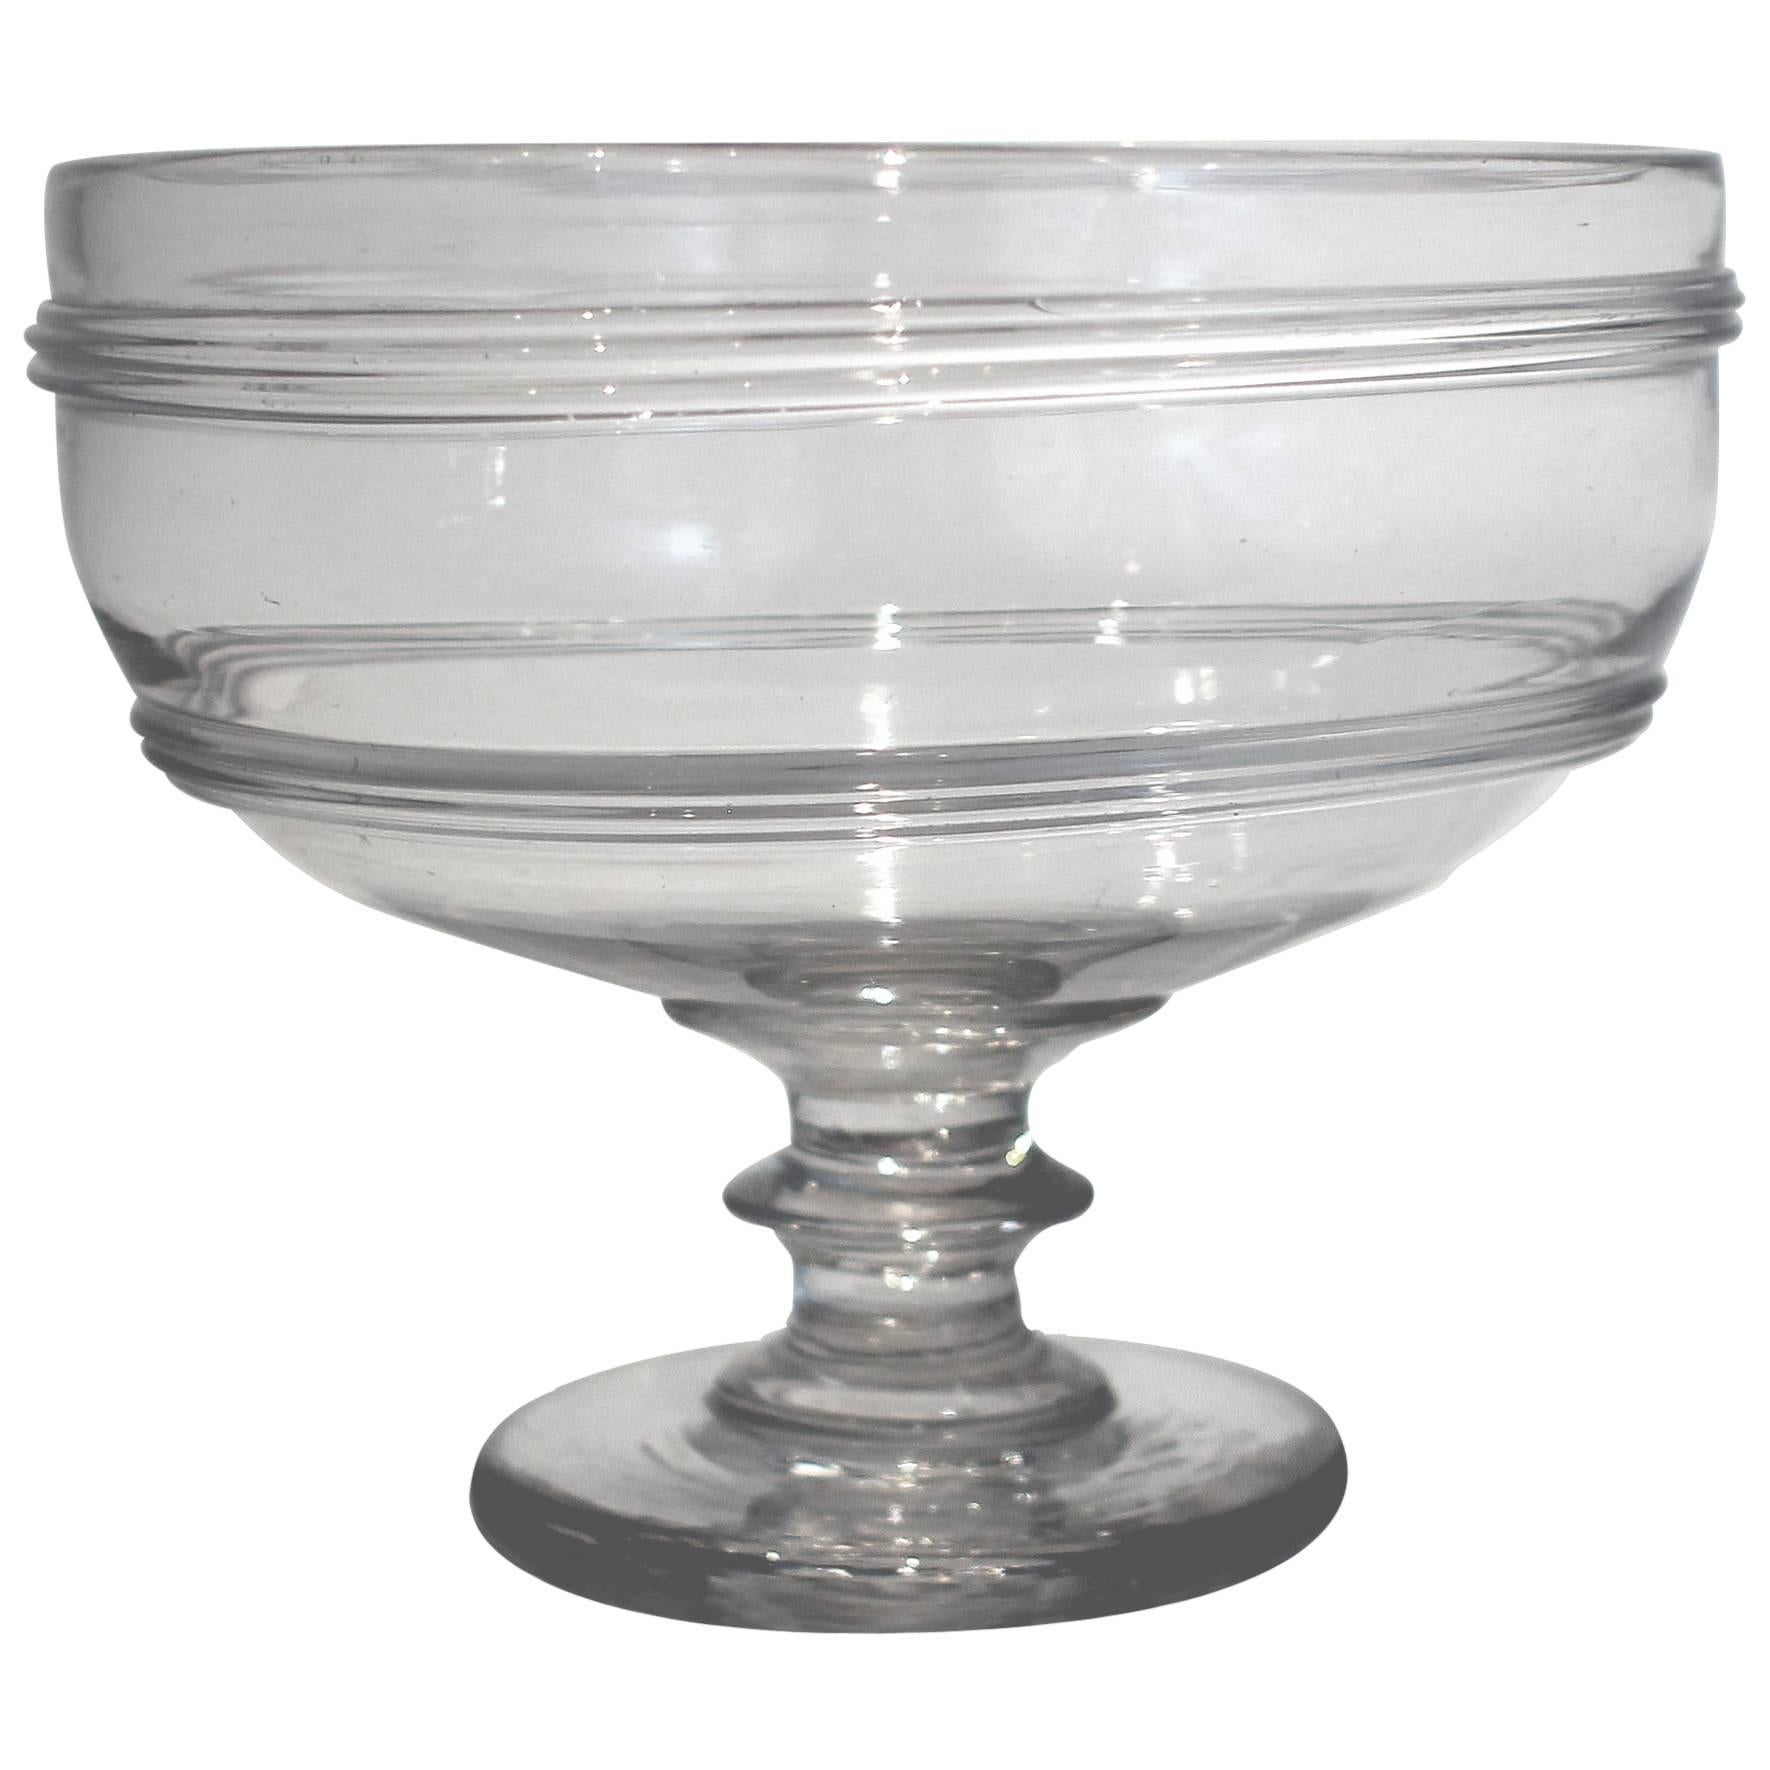 New England Blown Glass Compote, Early 19th Century